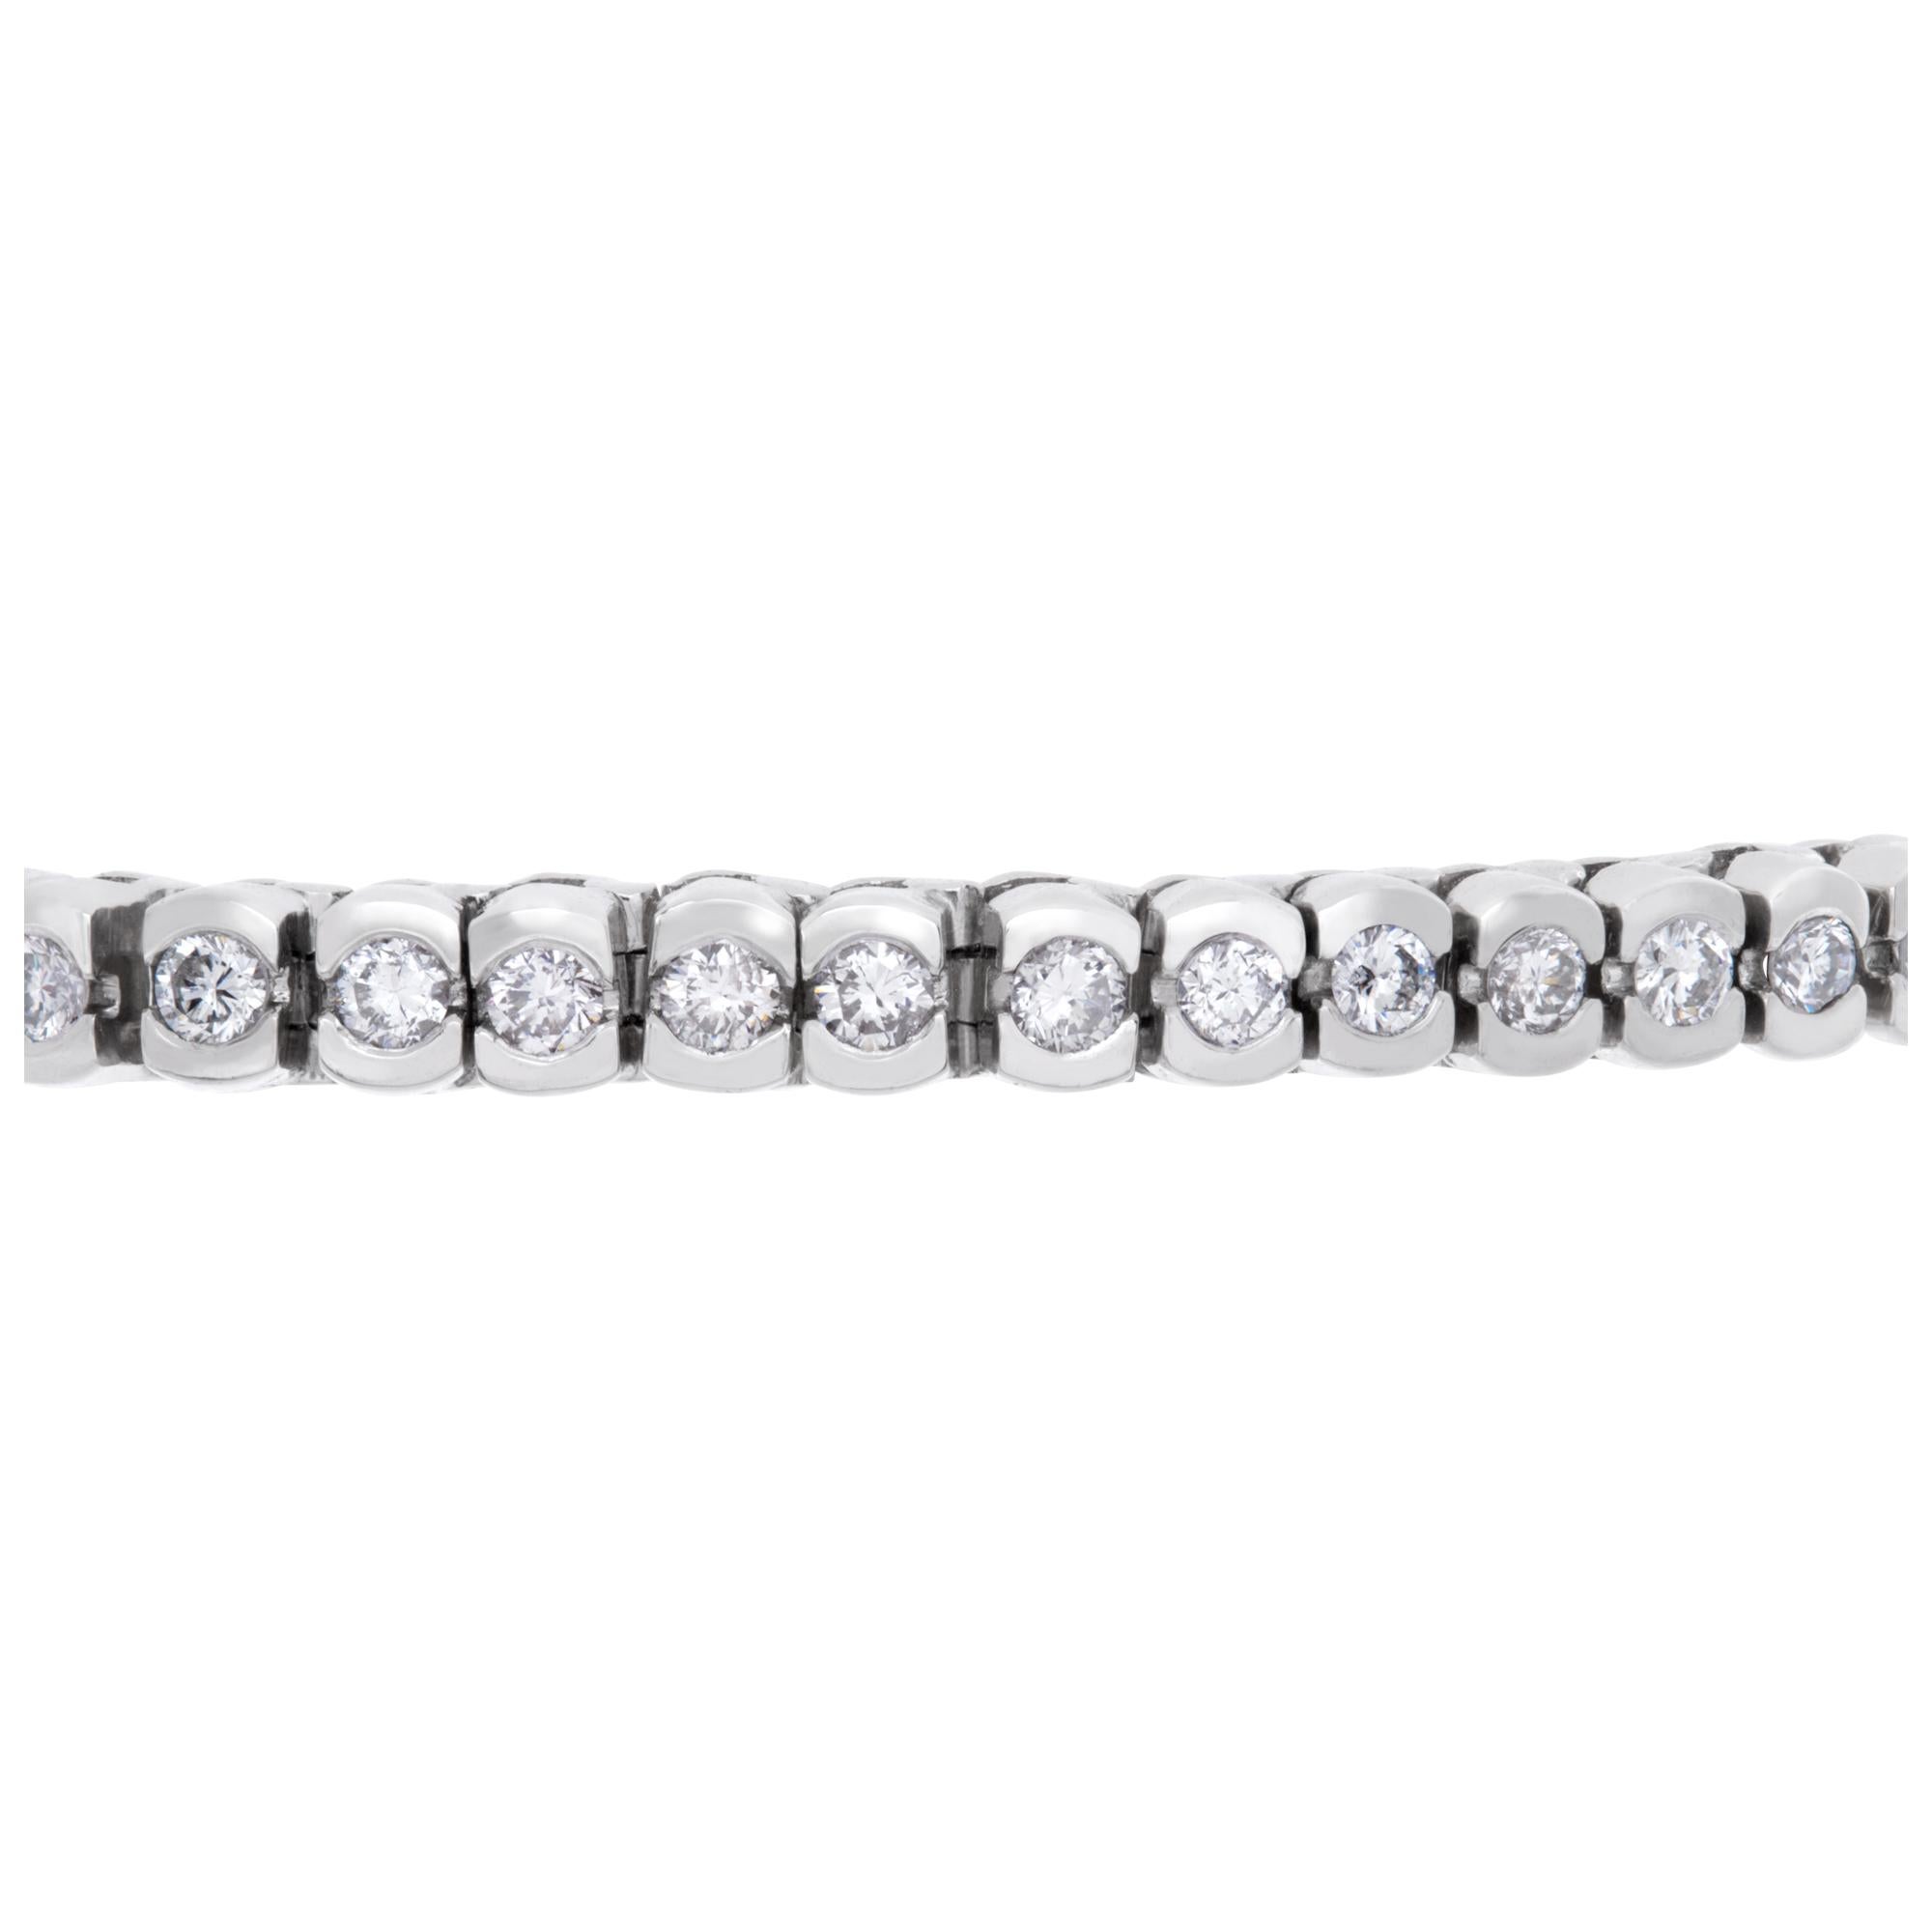 Diamond tennis bracelet in platinum with approximately 6 carats in round cut bezel set diamonds (G-H Color, VS1-VS2 Clarity). Bracelet has security clasp with chain. Length 7.5'', width 4mm.
